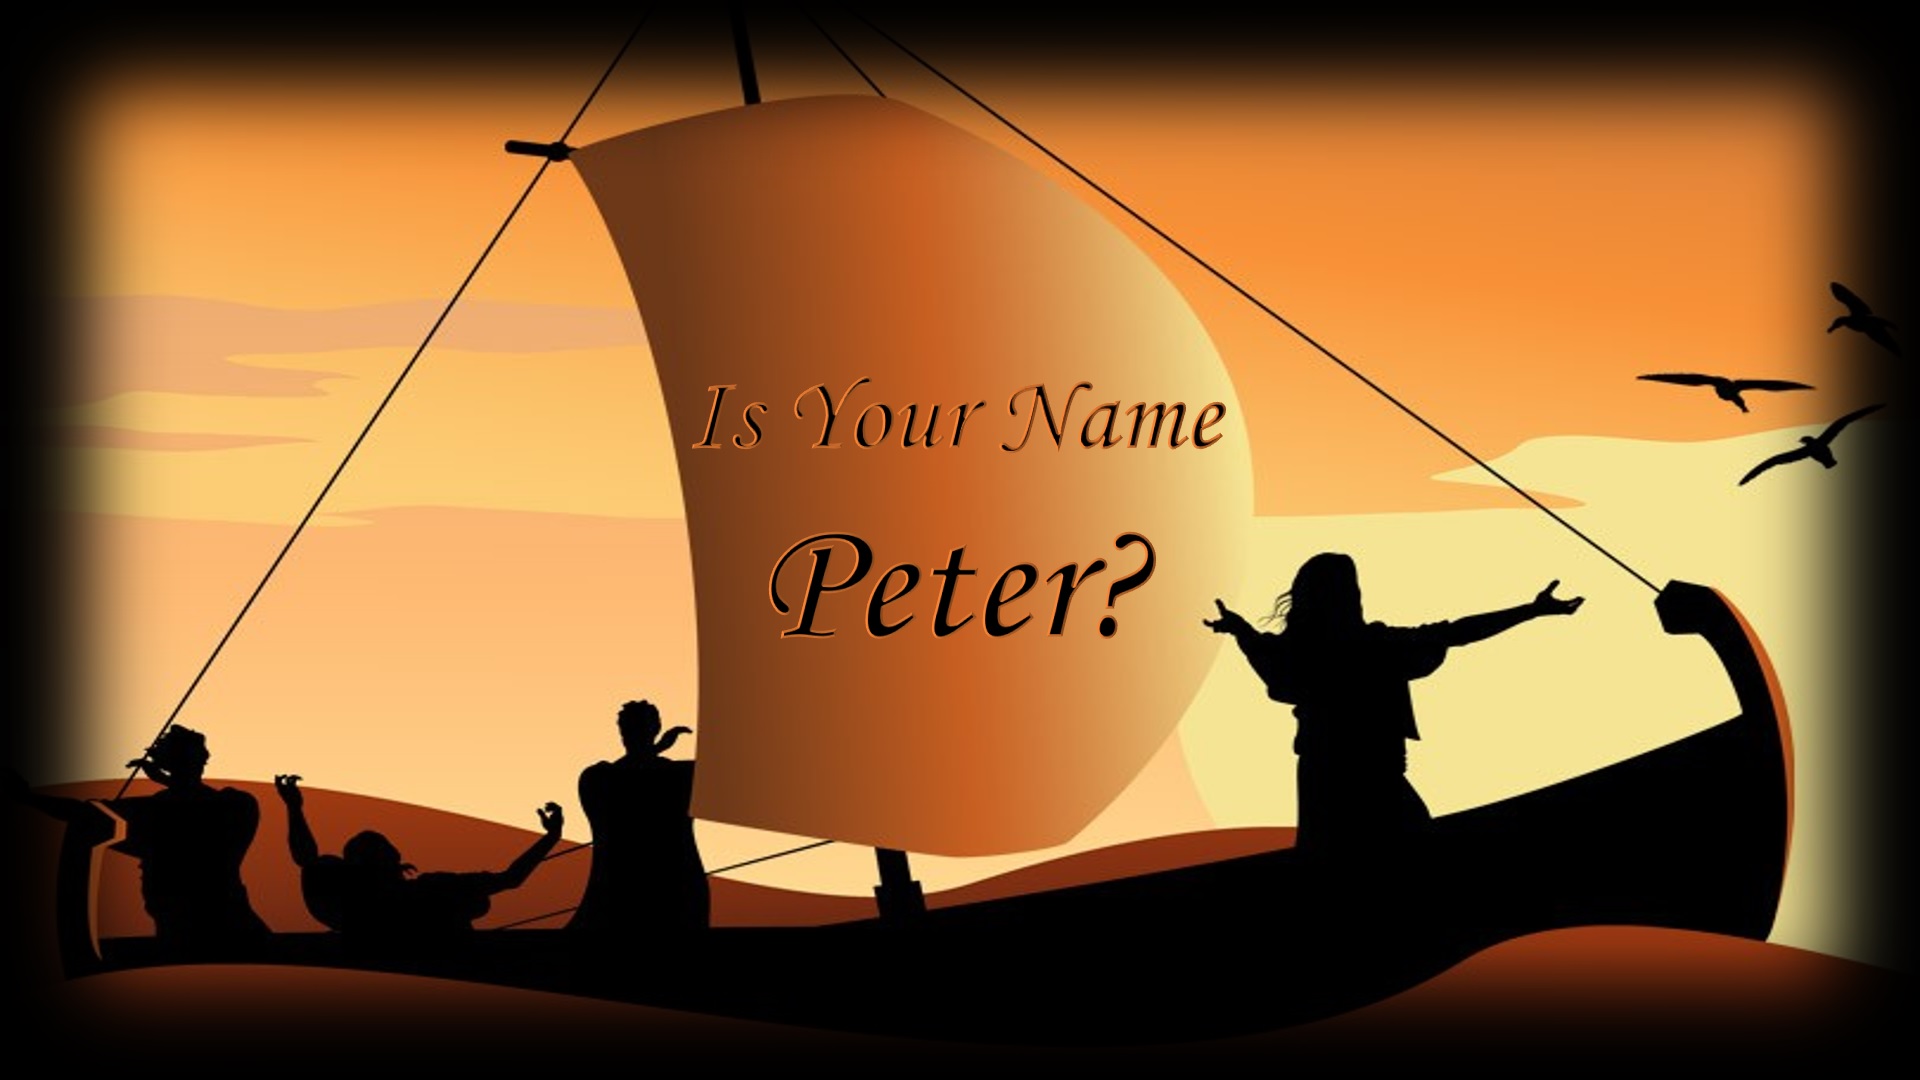 Is Your Name Peter?